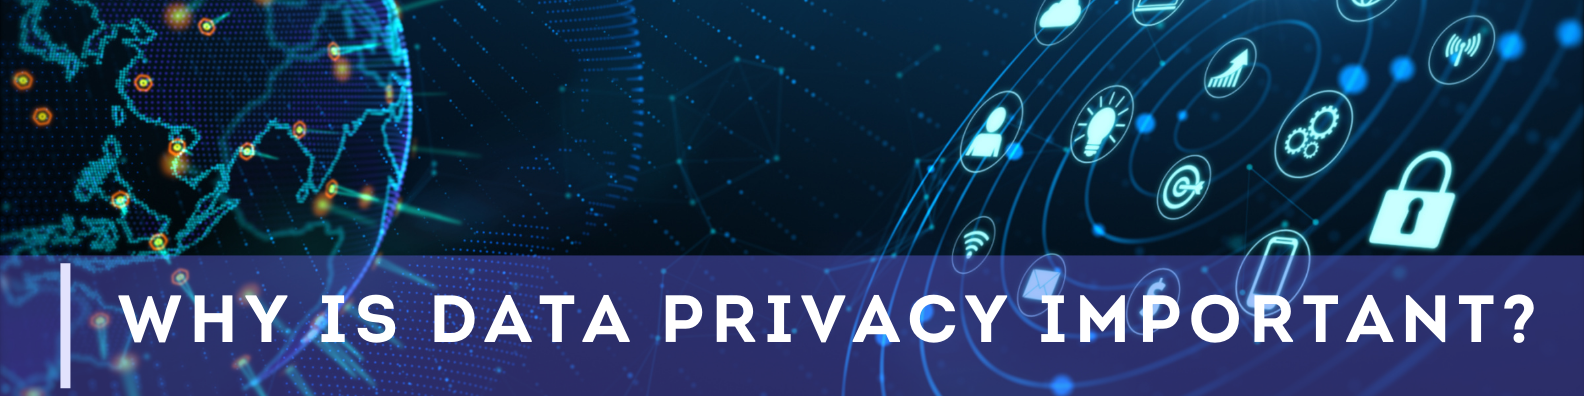 Why is Data Privacy Important